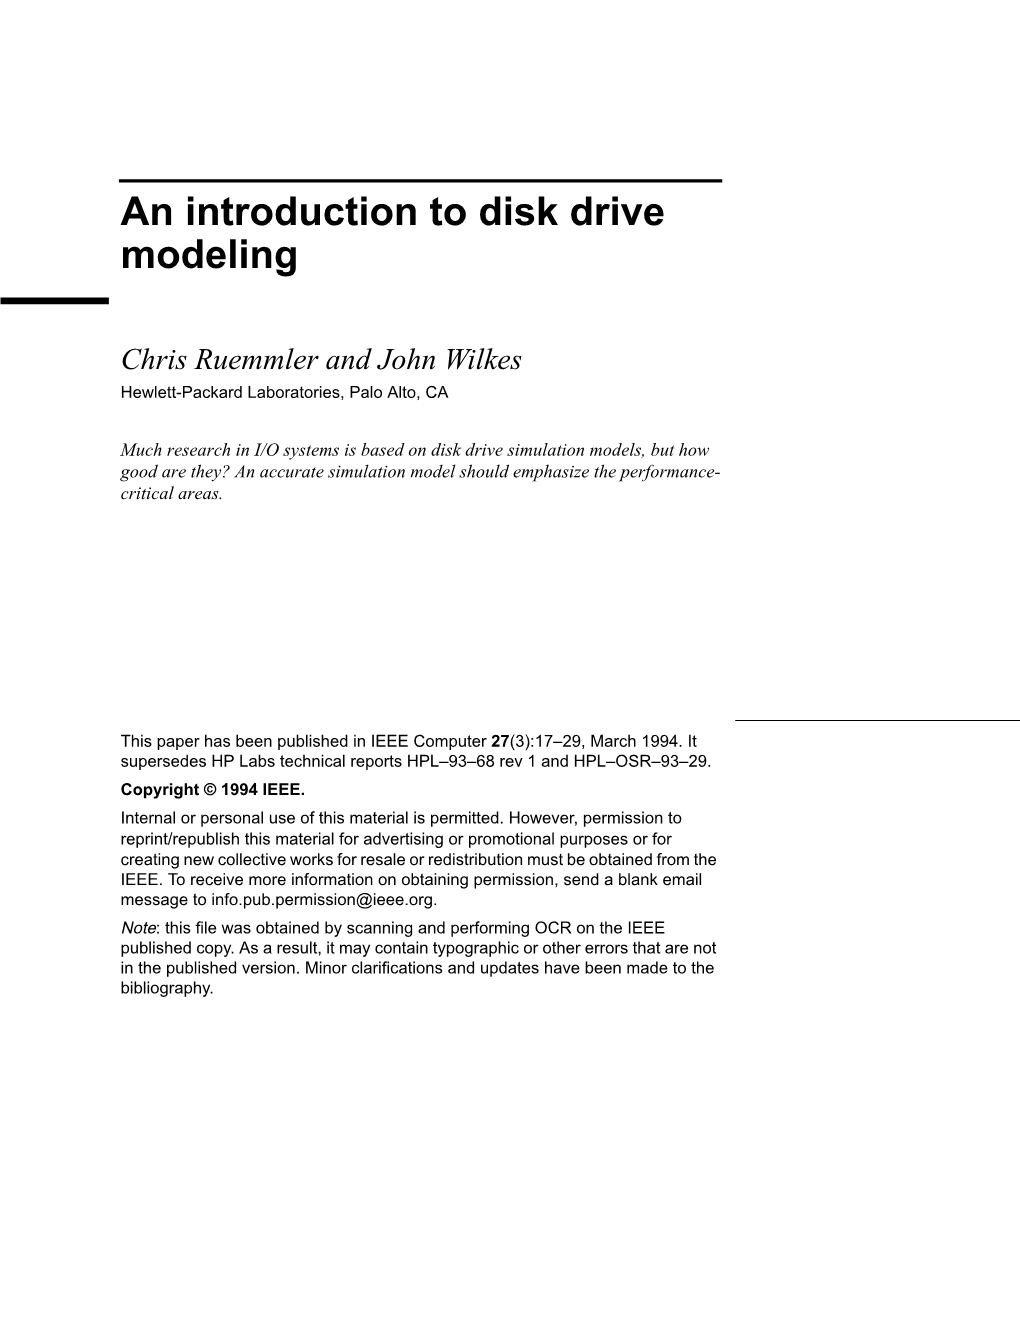 An Introduction to Disk Drive Modeling